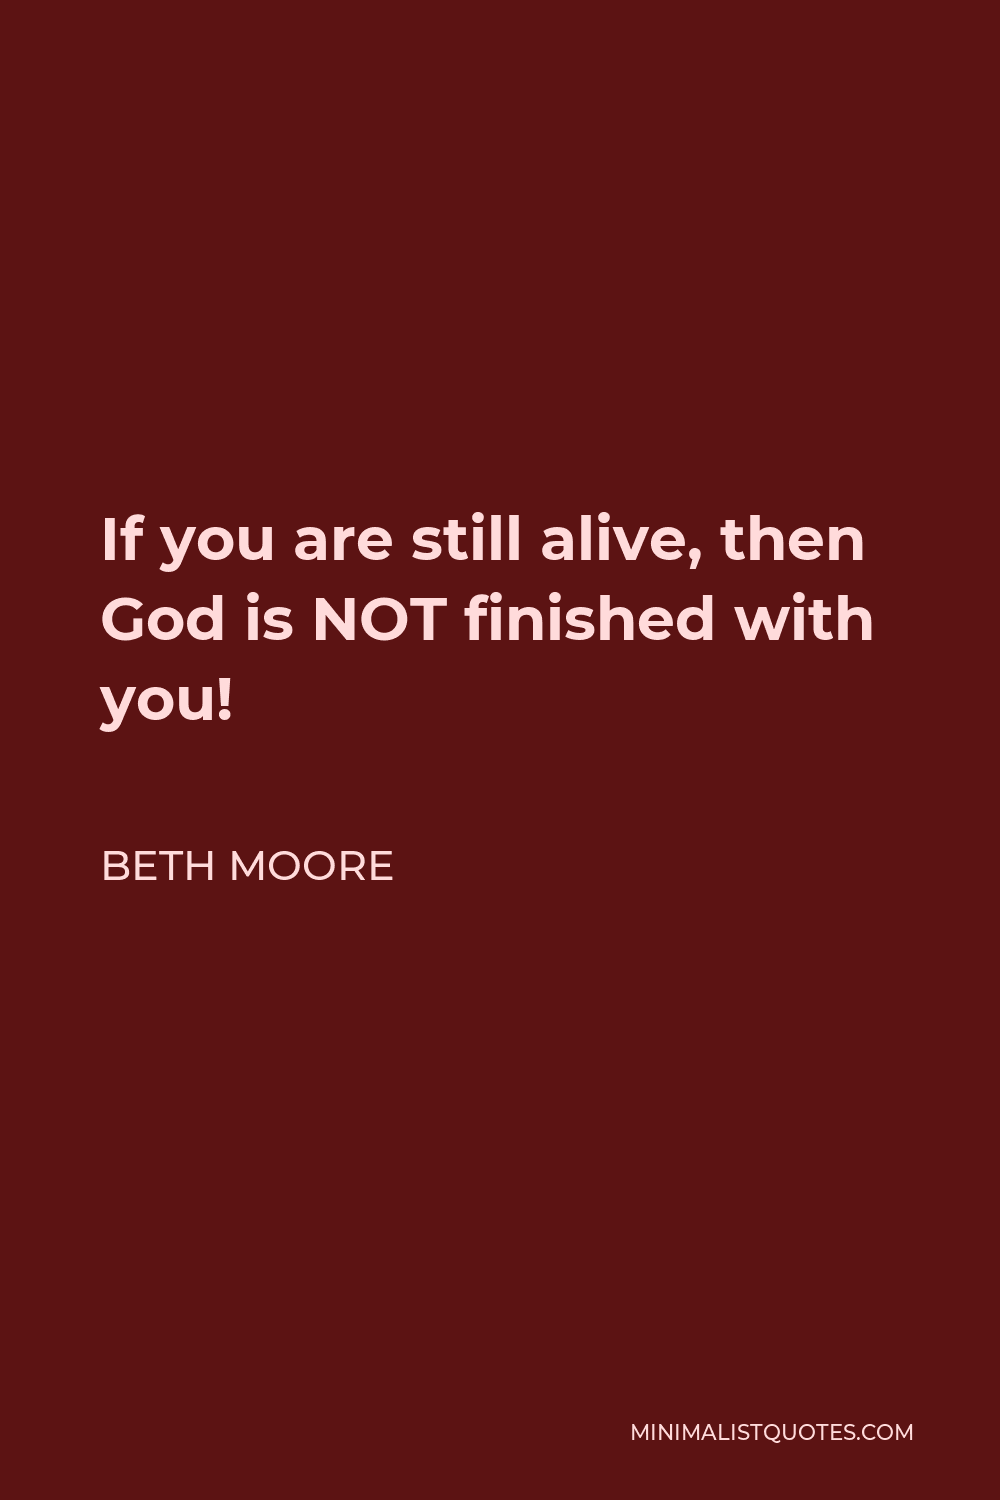 Beth Moore Quote - If you are still alive, then God is NOT finished with you!